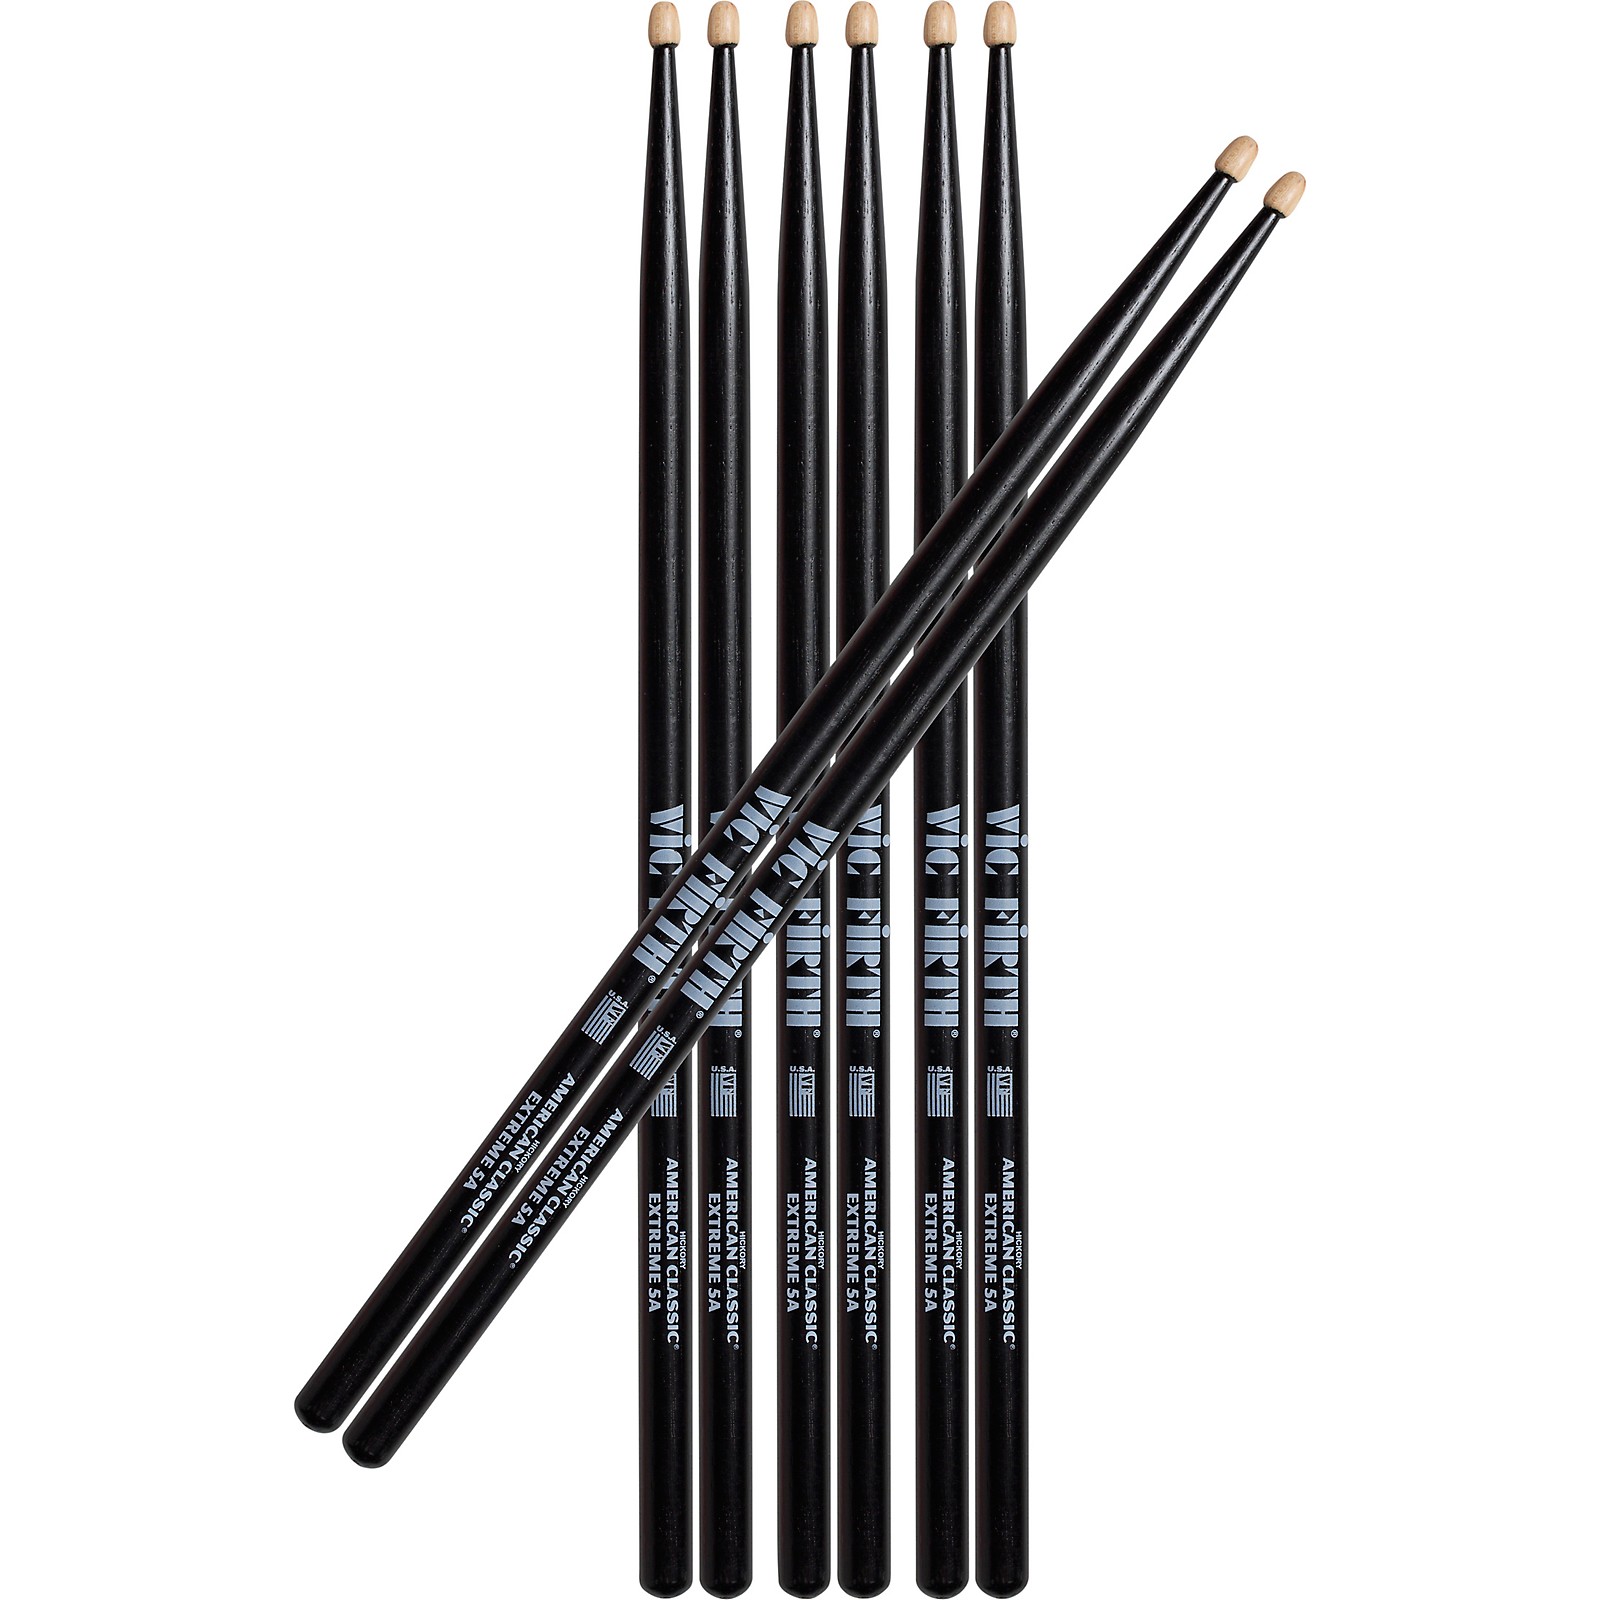 Vic Firth American Classic 5A Black Drumsticks Value Pack